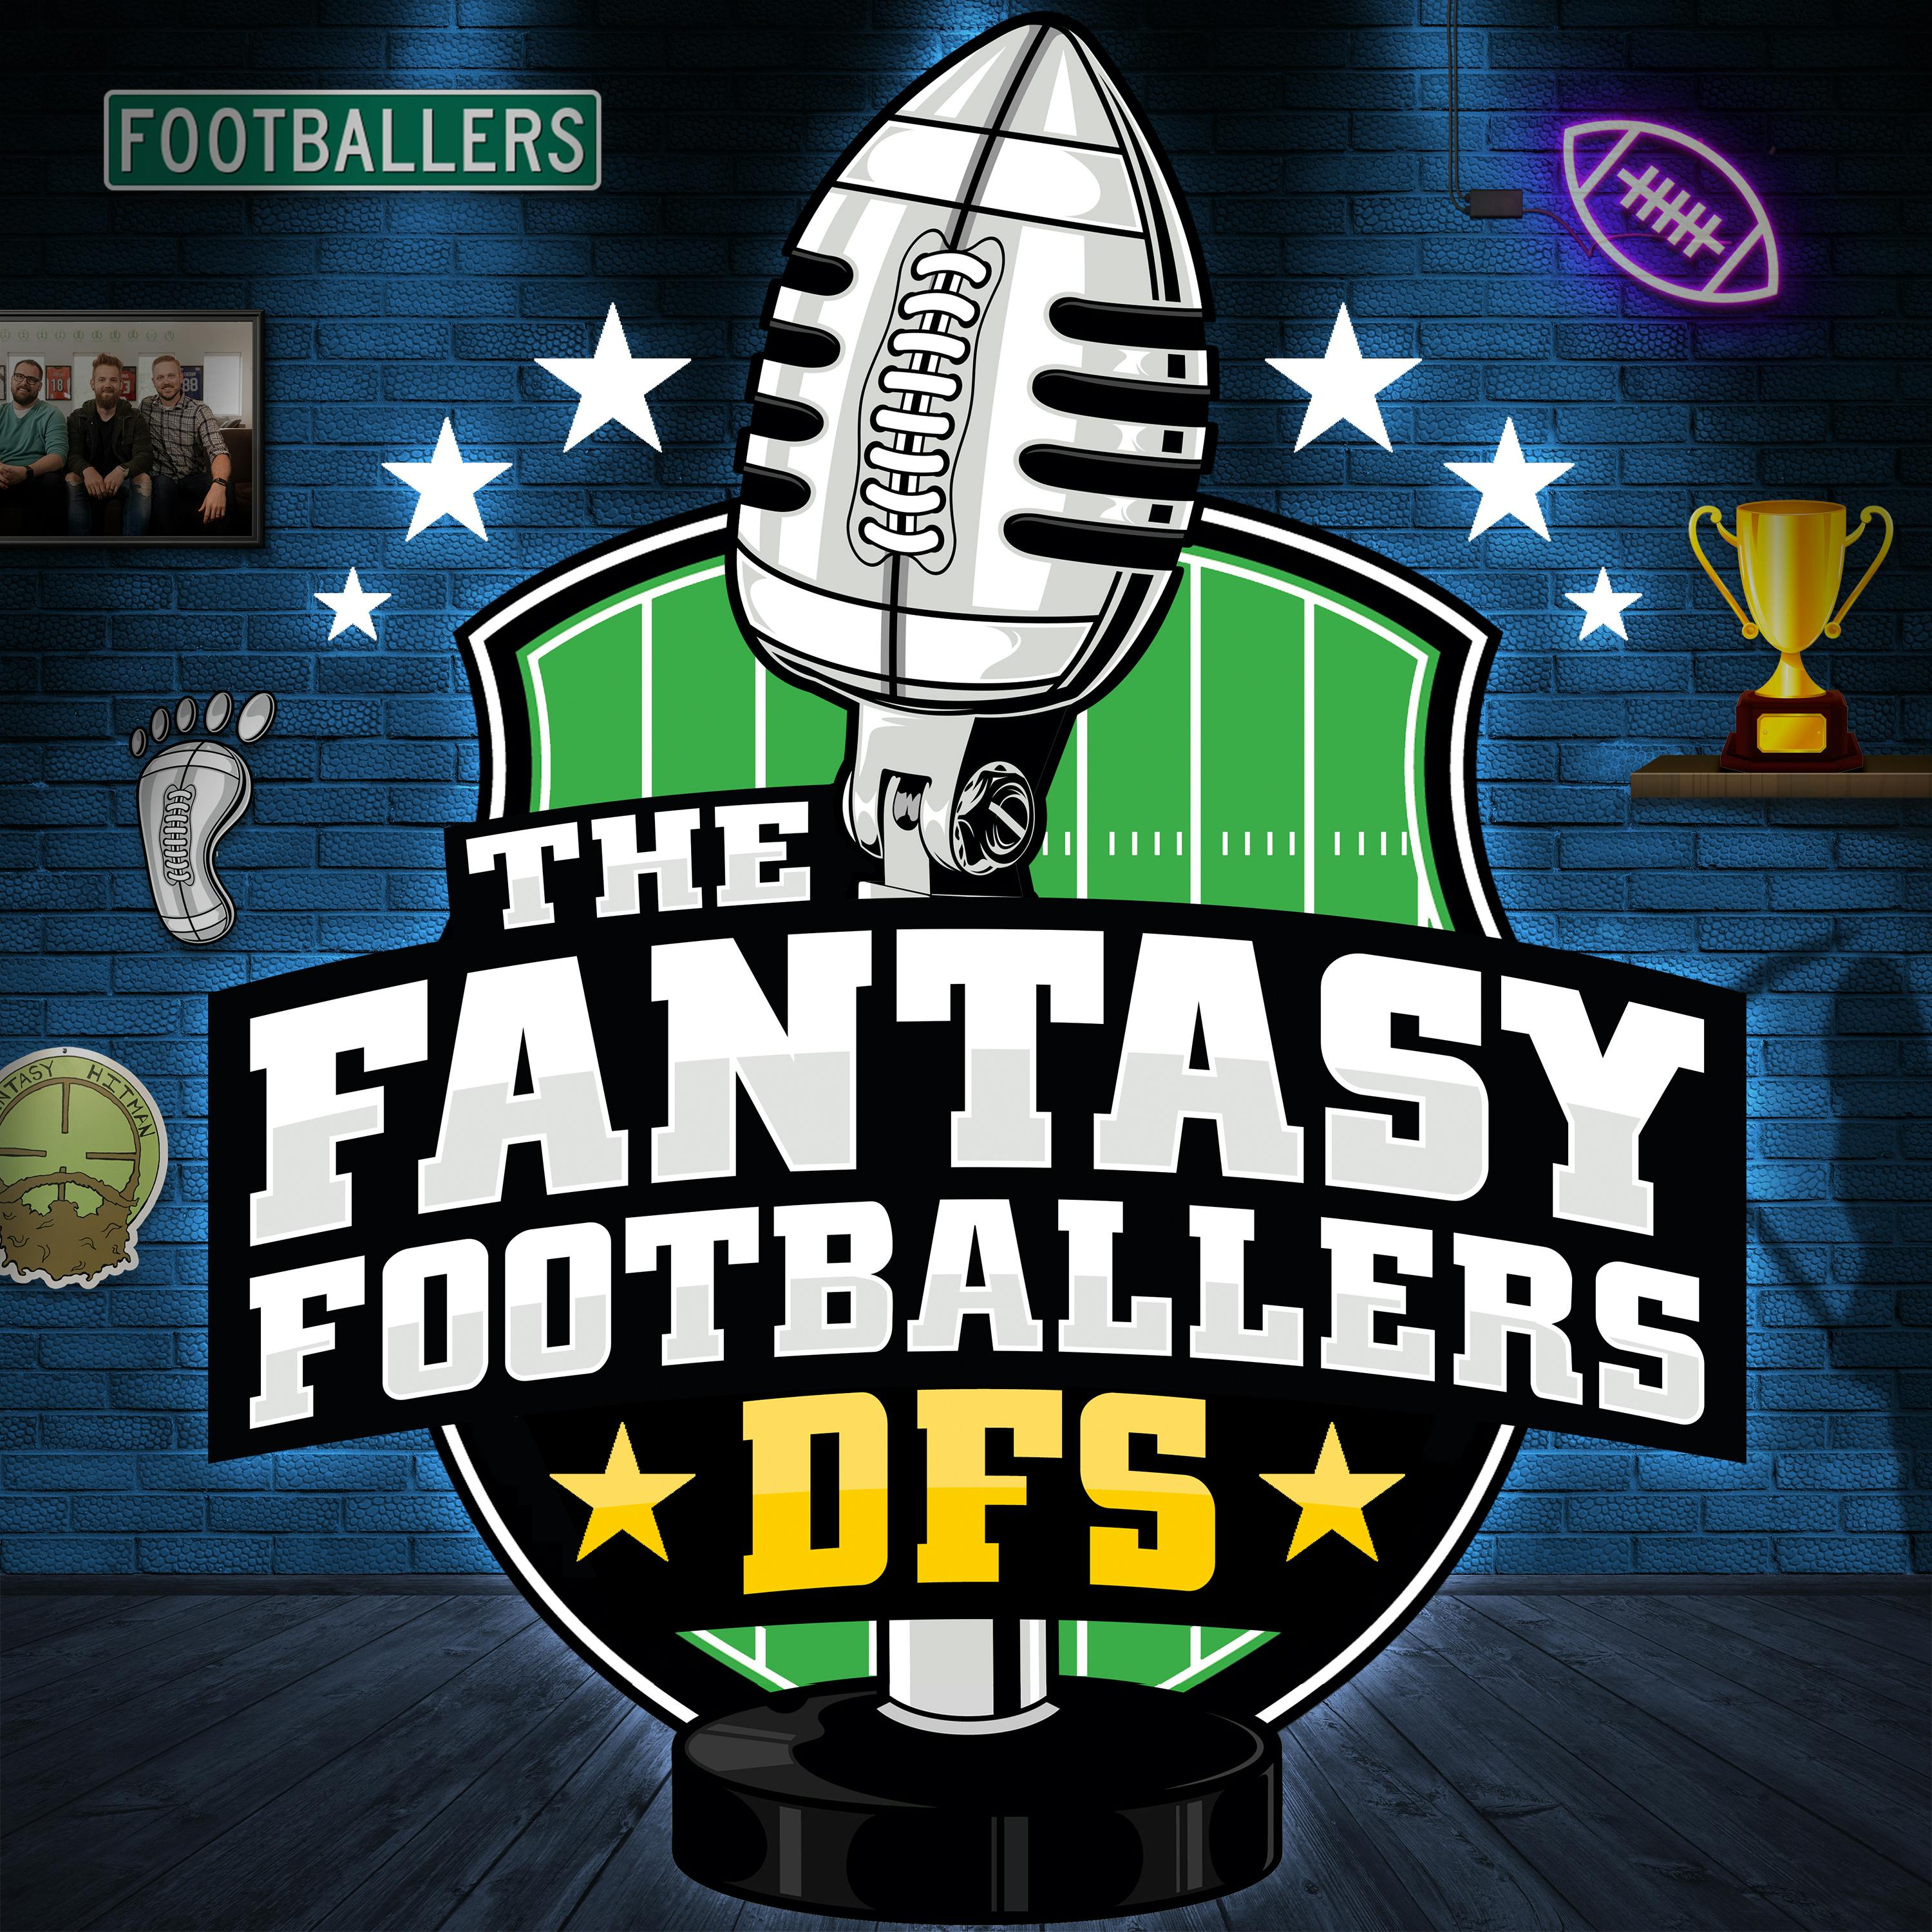 Week 14 DFS Preview + Staying in the Flames - Fantasy Football DFS